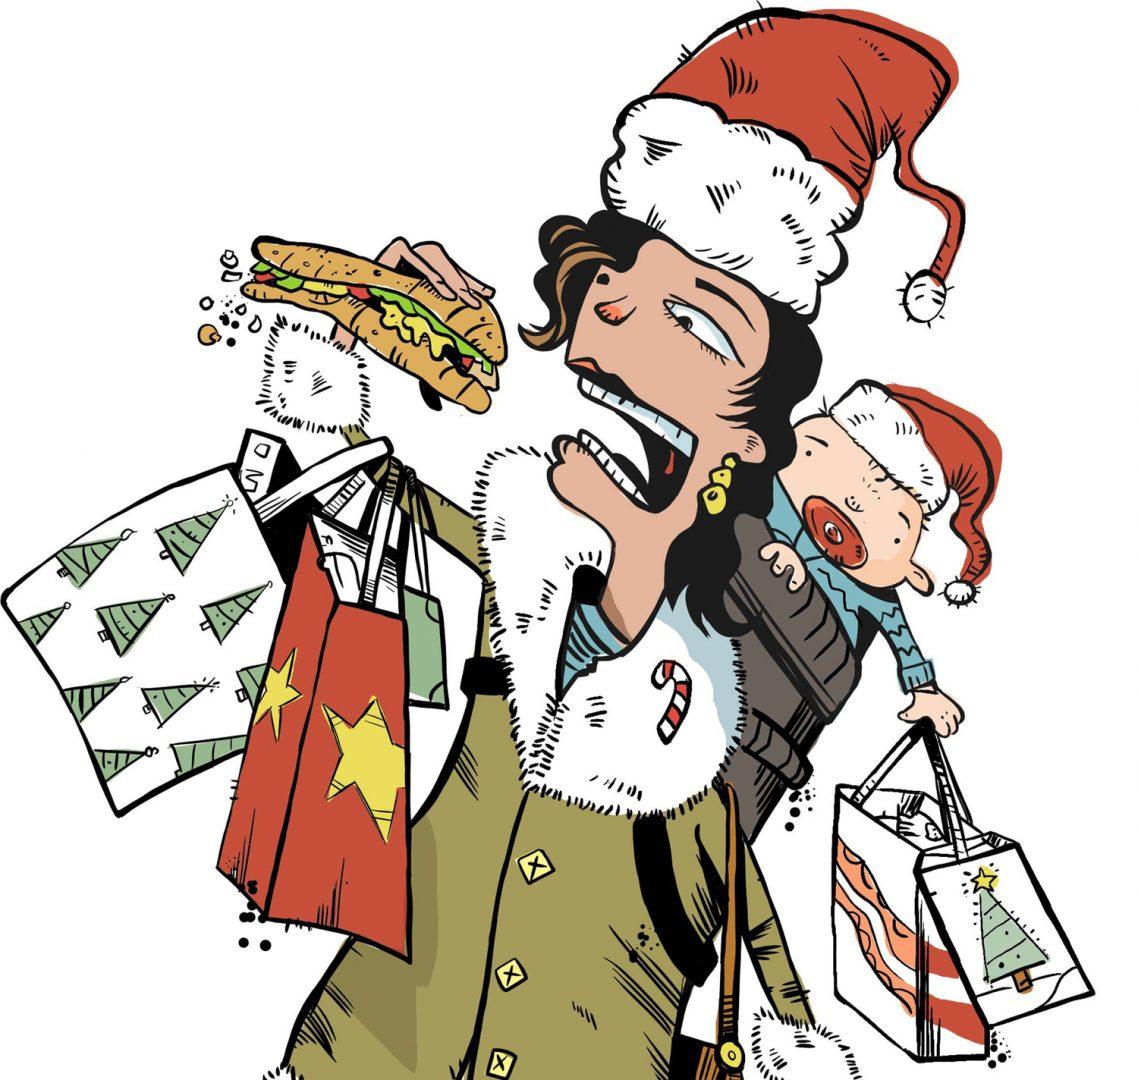 Color illustration of woman struggling to eat a sandwich while balancing holiday shopping bags and baby. (Tim Lee/TNS)